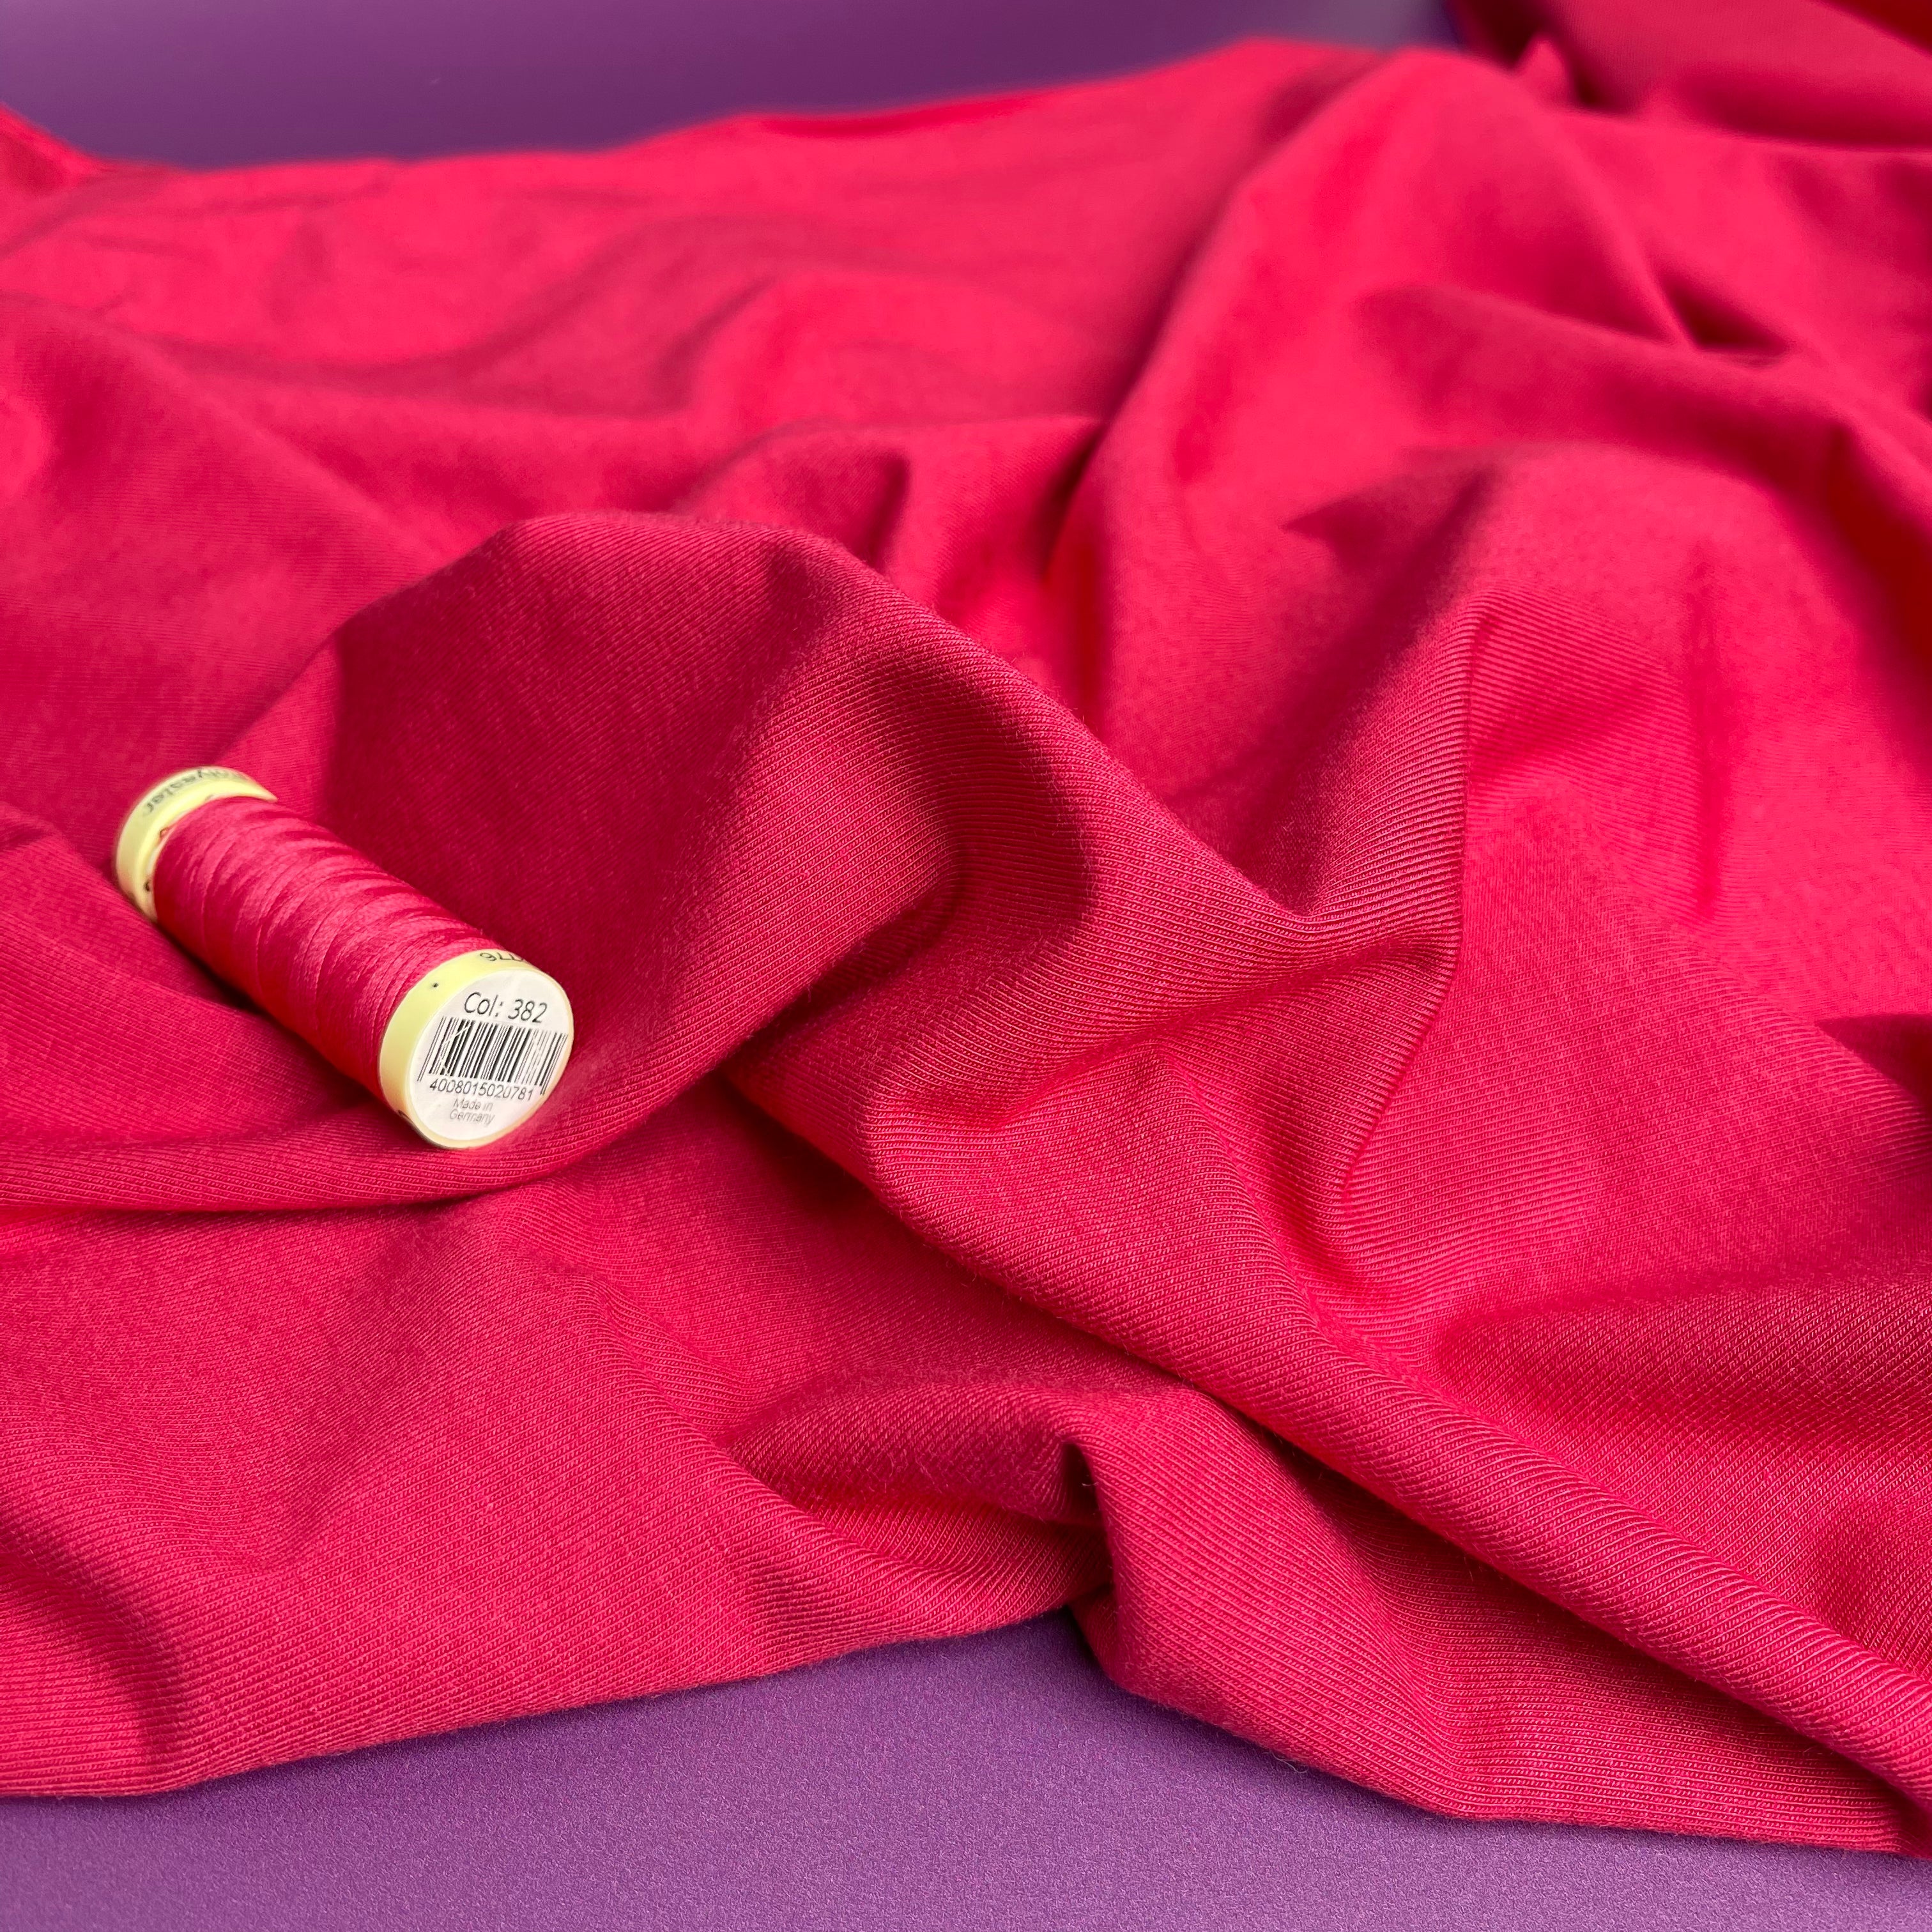 Bliss Strawberry Jersey Fabric with TENCEL™ Modal Fibres